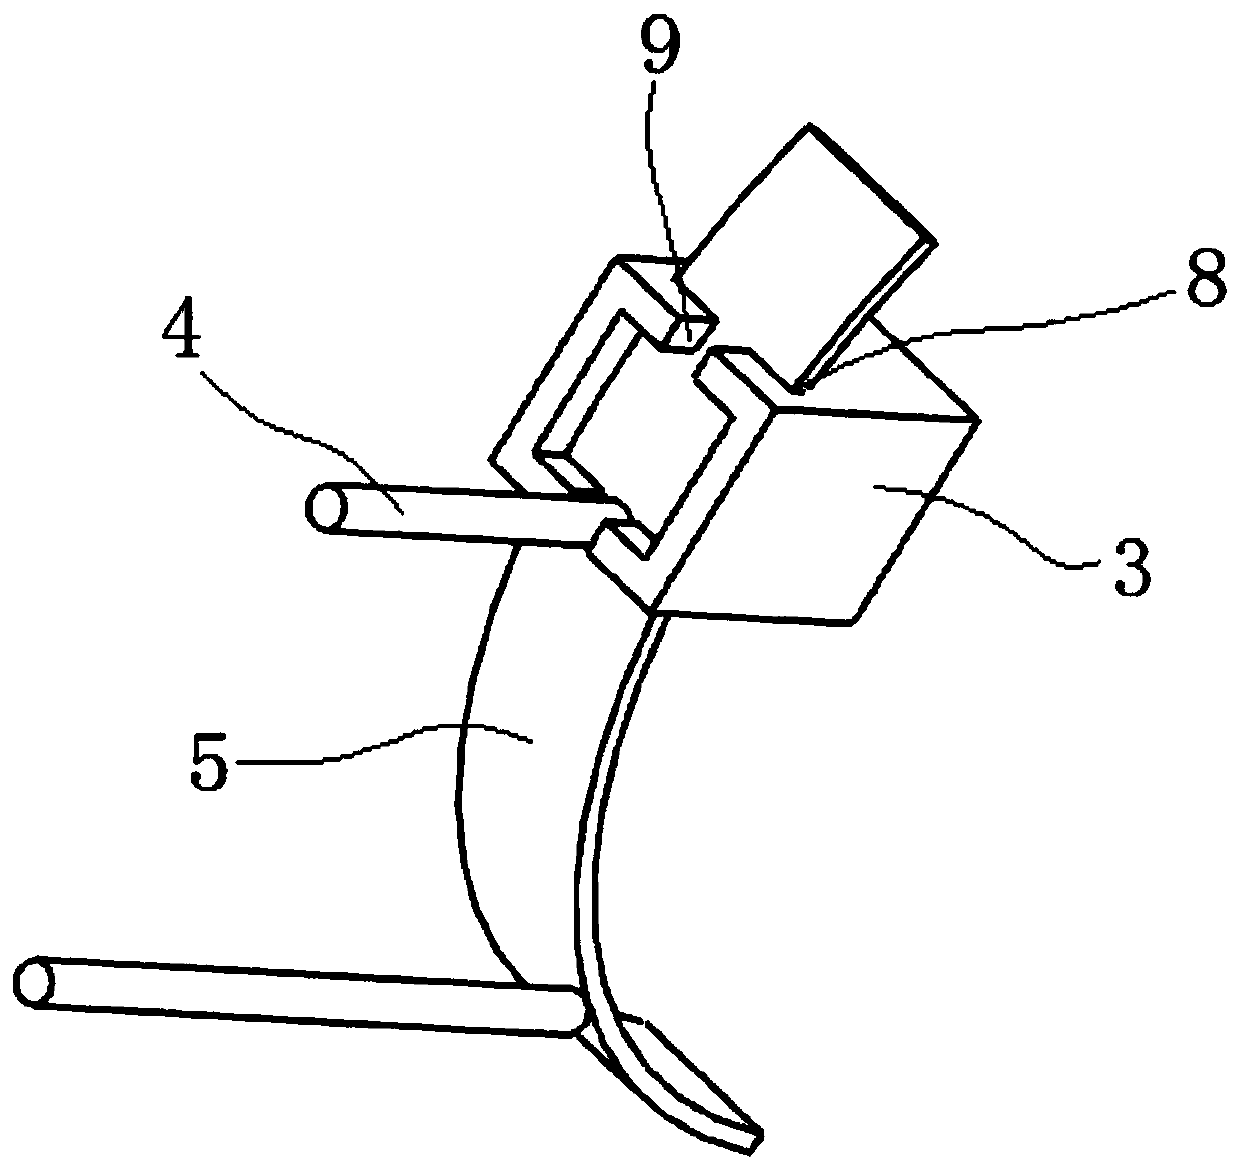 Corn sowing device